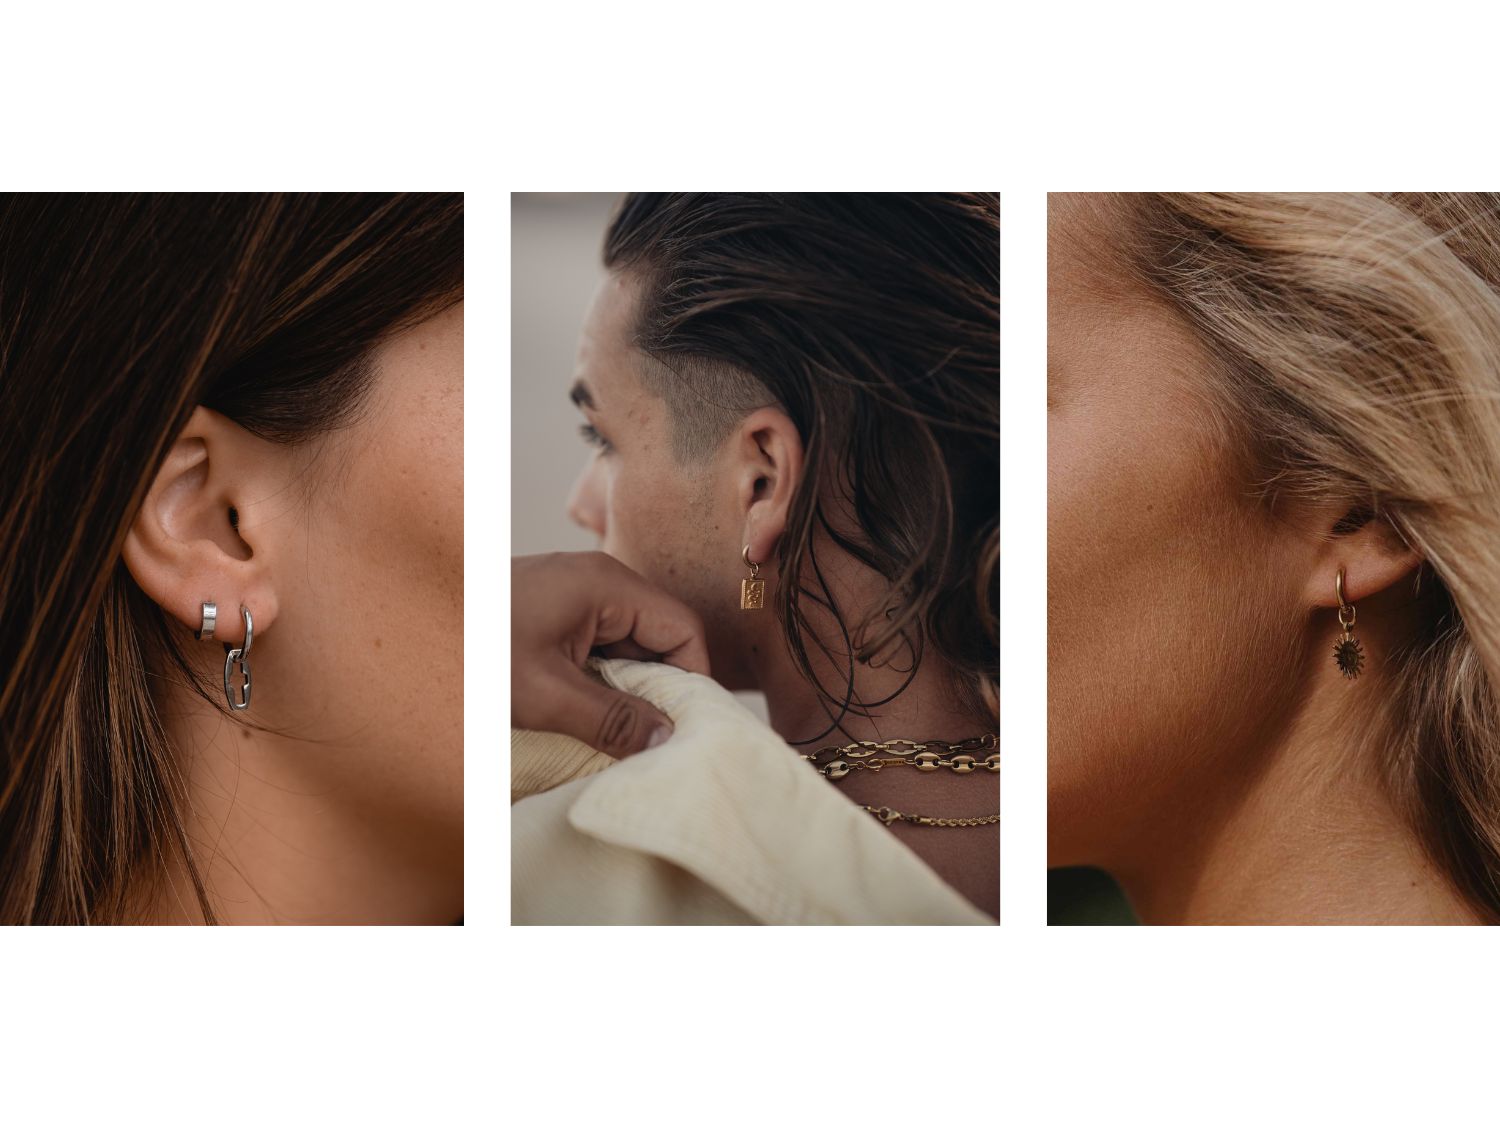 HOW TO COMBINE EARRINGS WITH YOUR LOOK